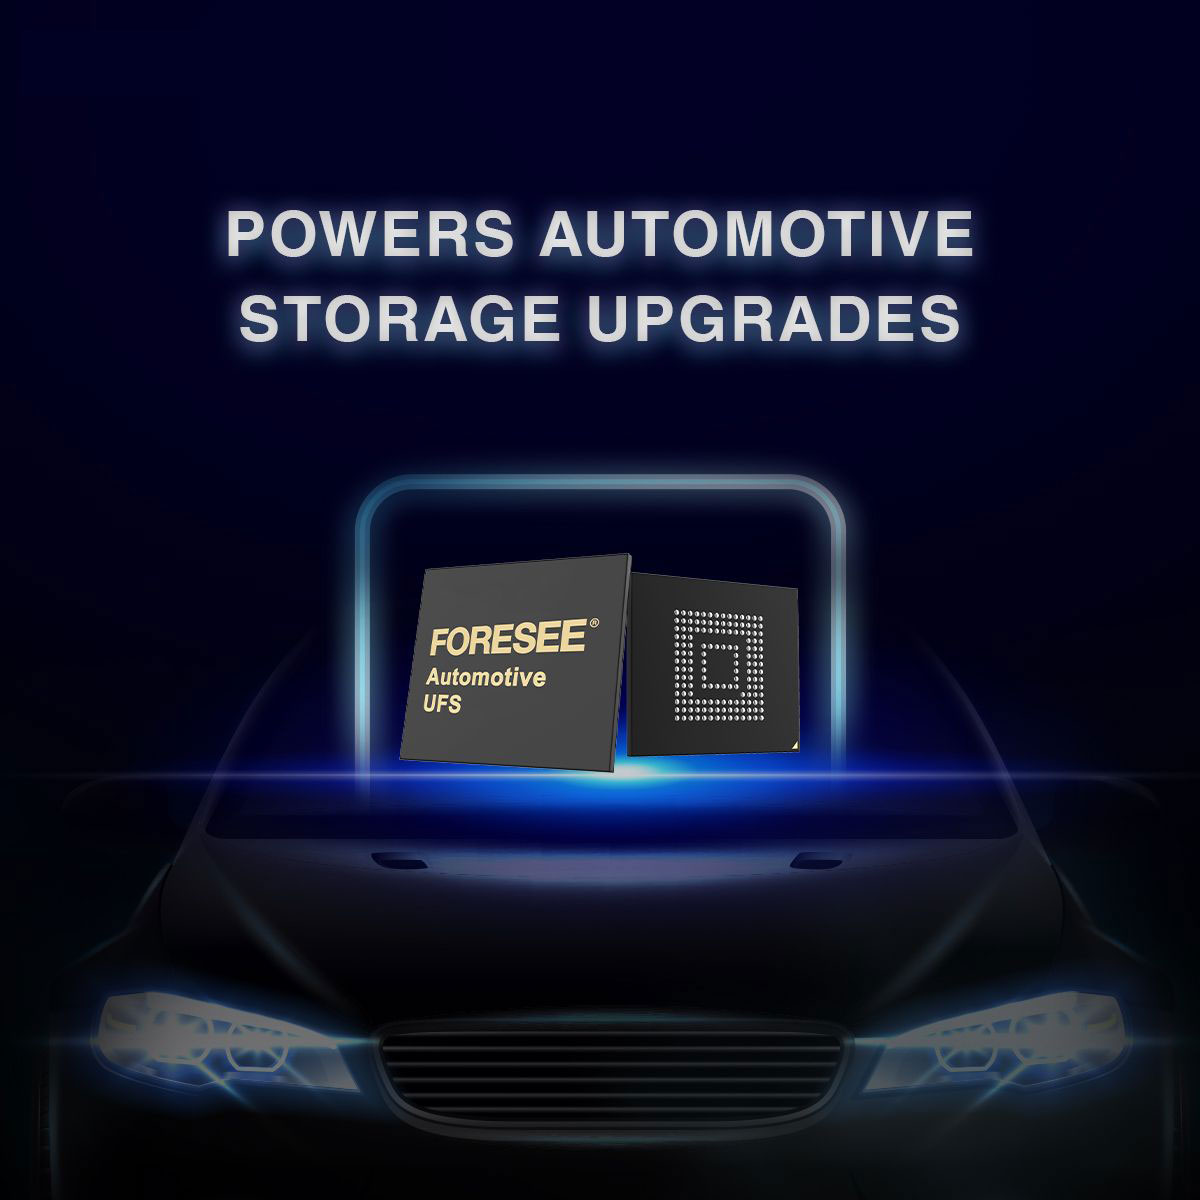 Read Speed Increased Six-fold! Longsys's FORESEE Automotive UFS Powers Automotive Storage Upgrades